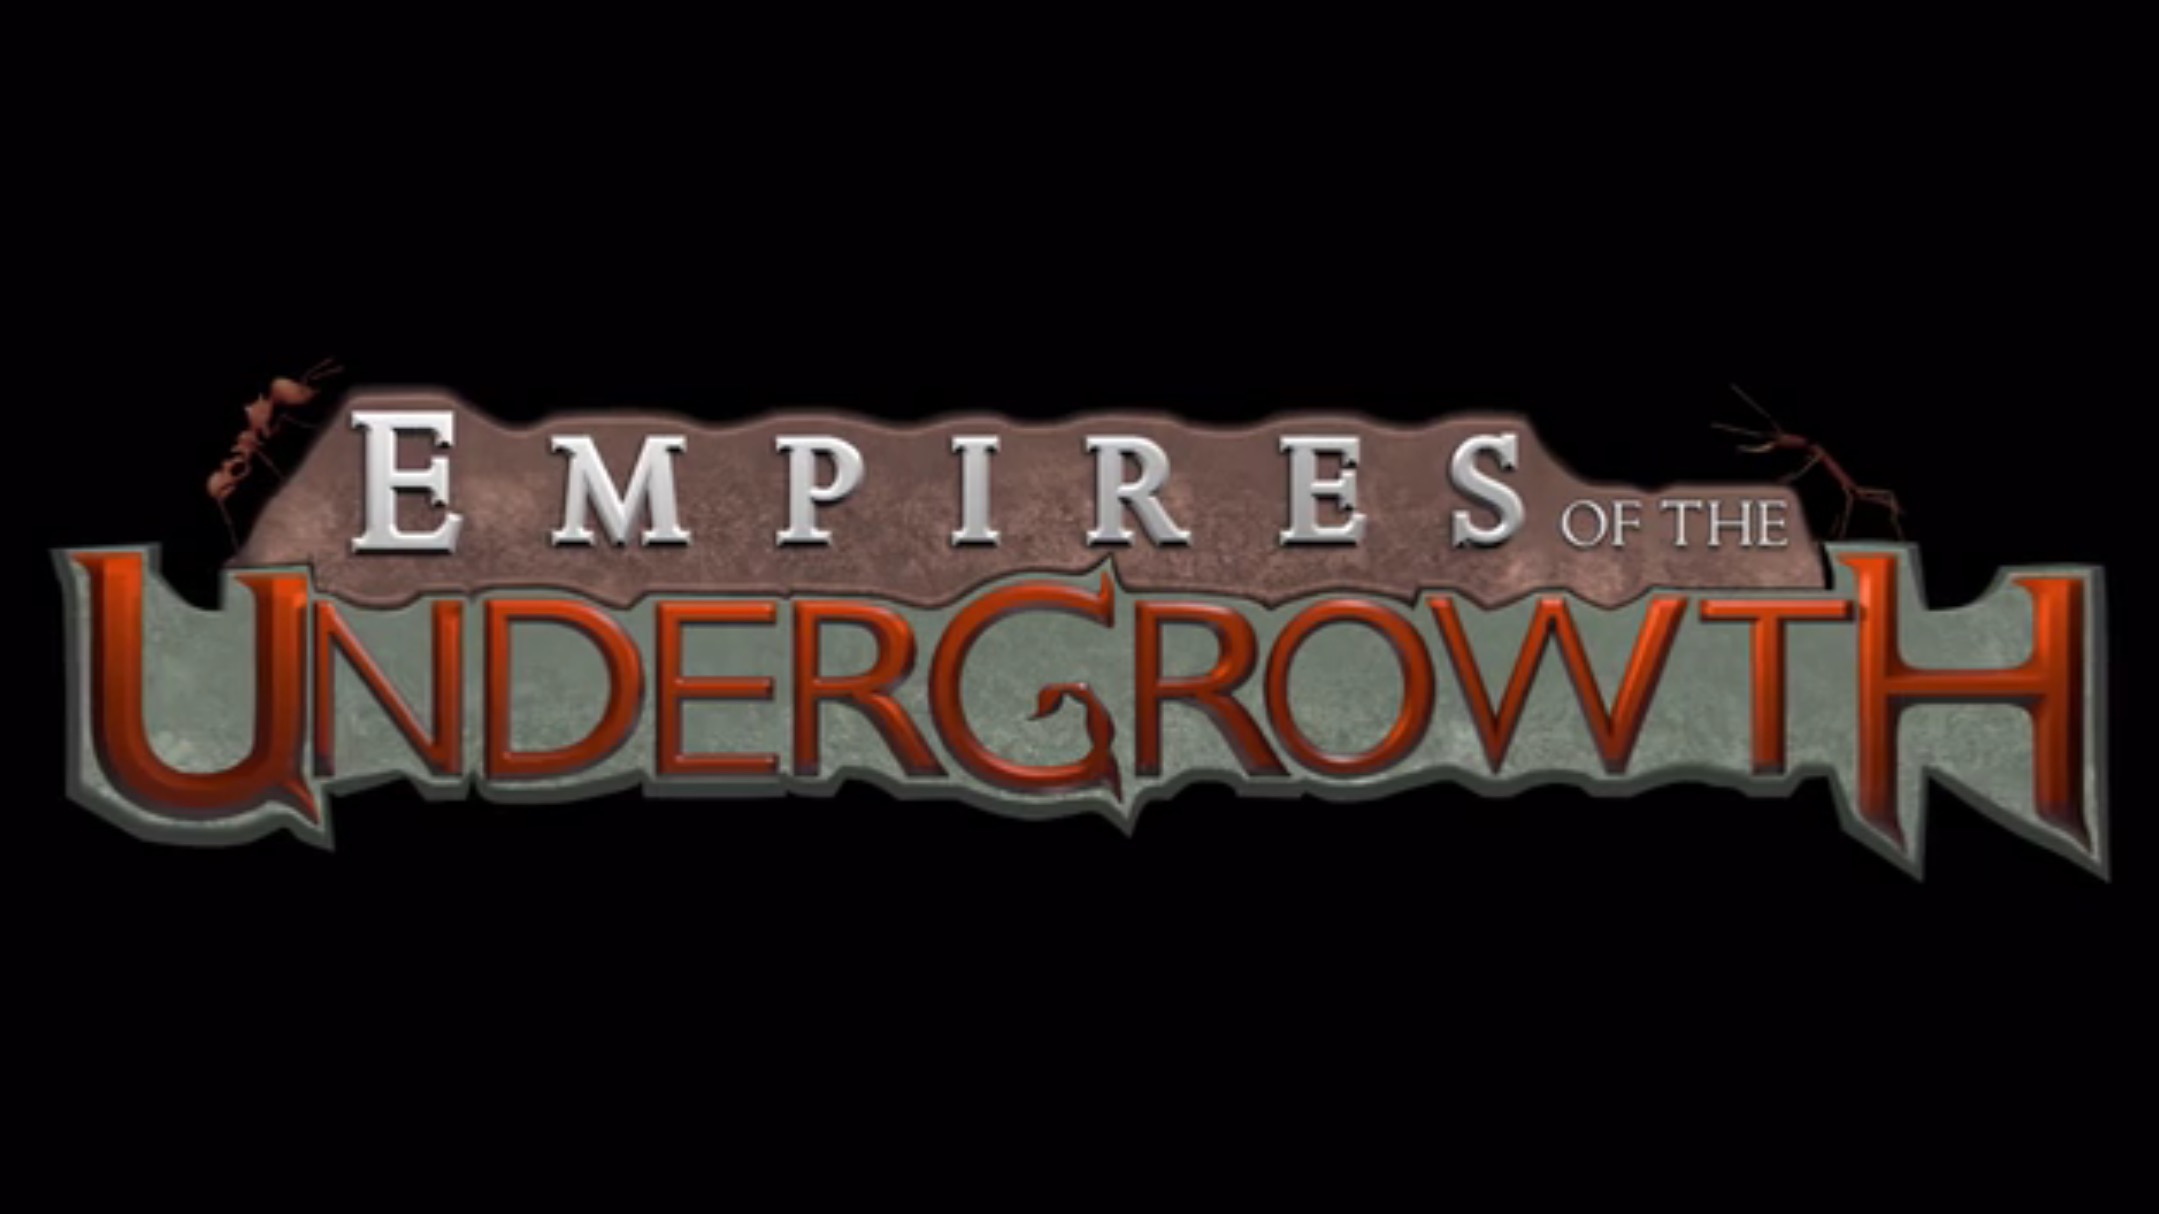 get your ants to follow pheromones in empire of the undergrowth